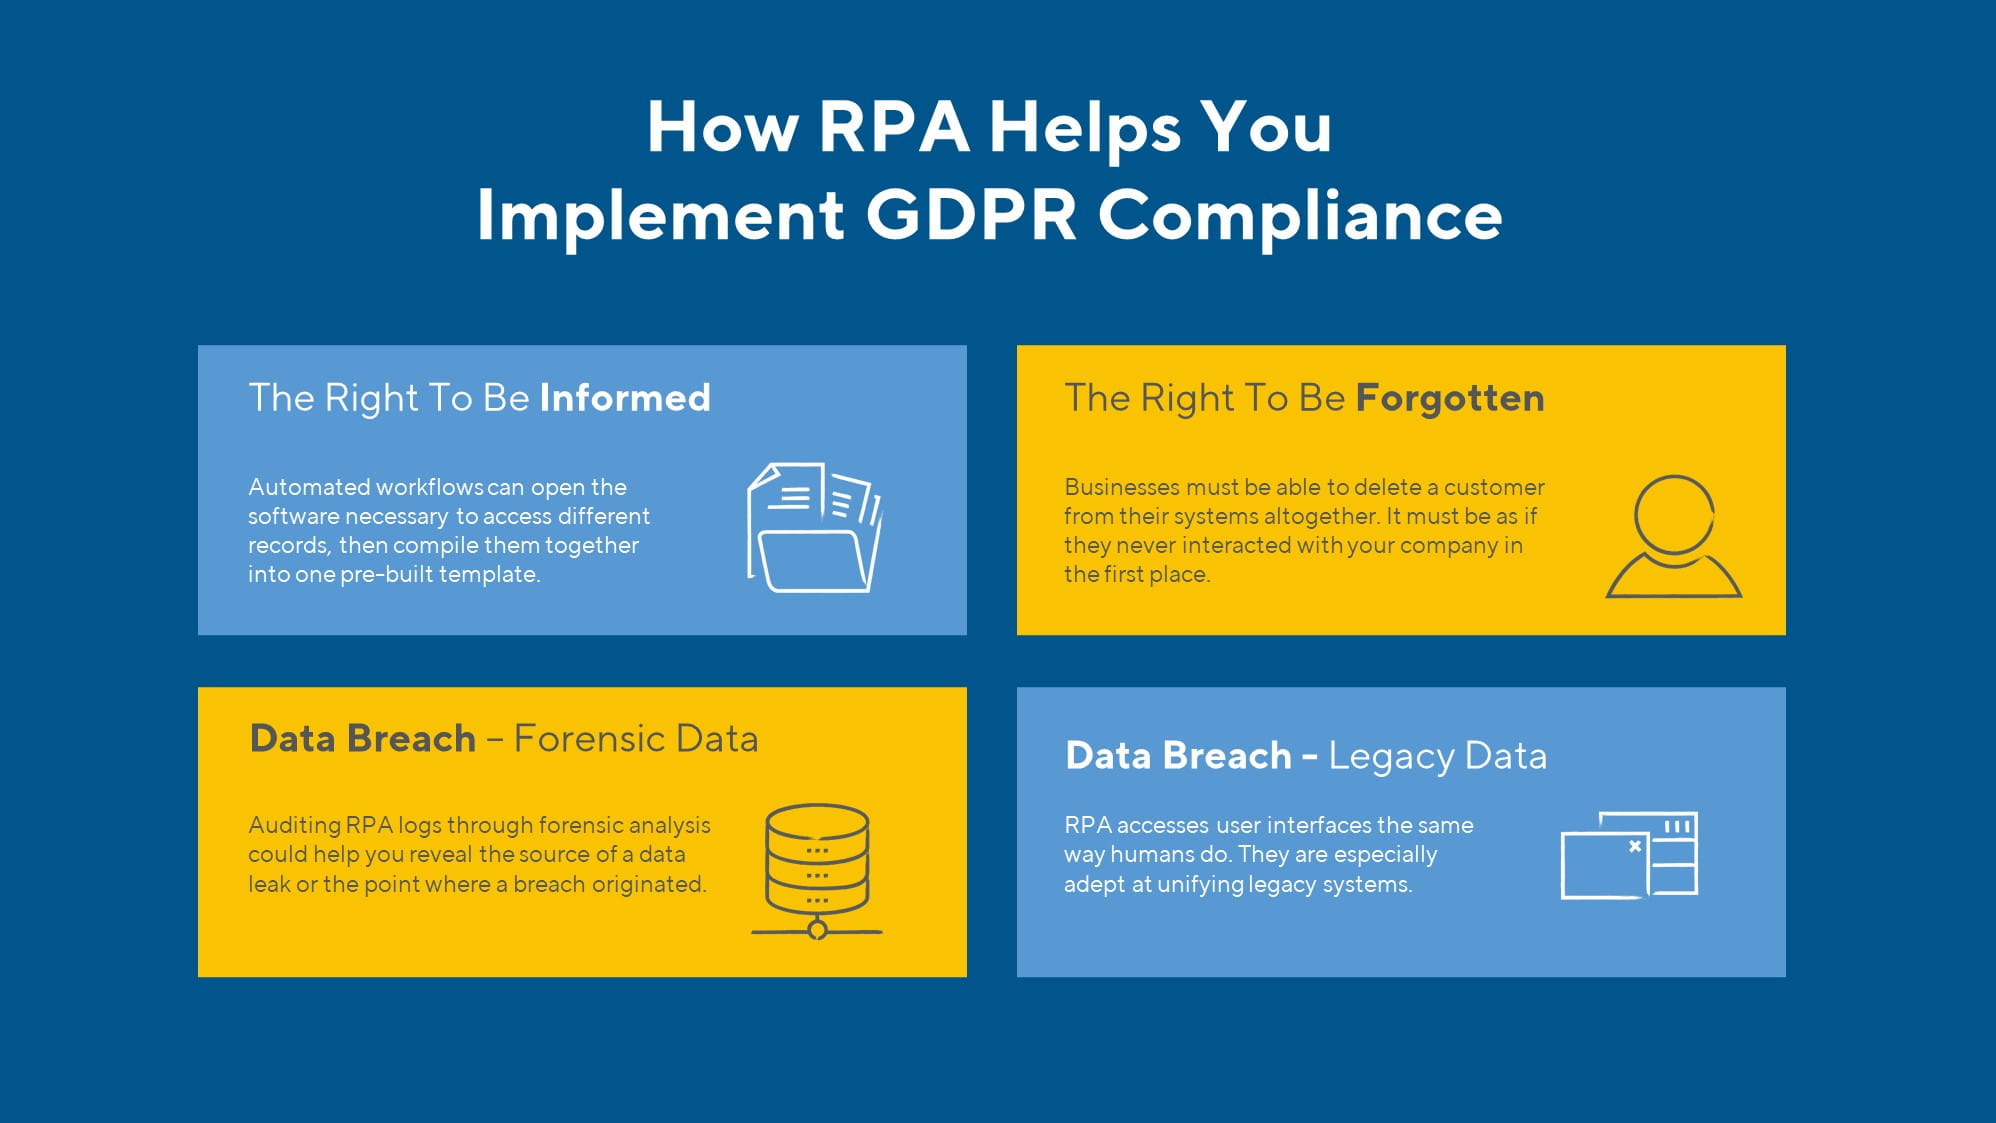 How RPA can help with GDPR compliance.